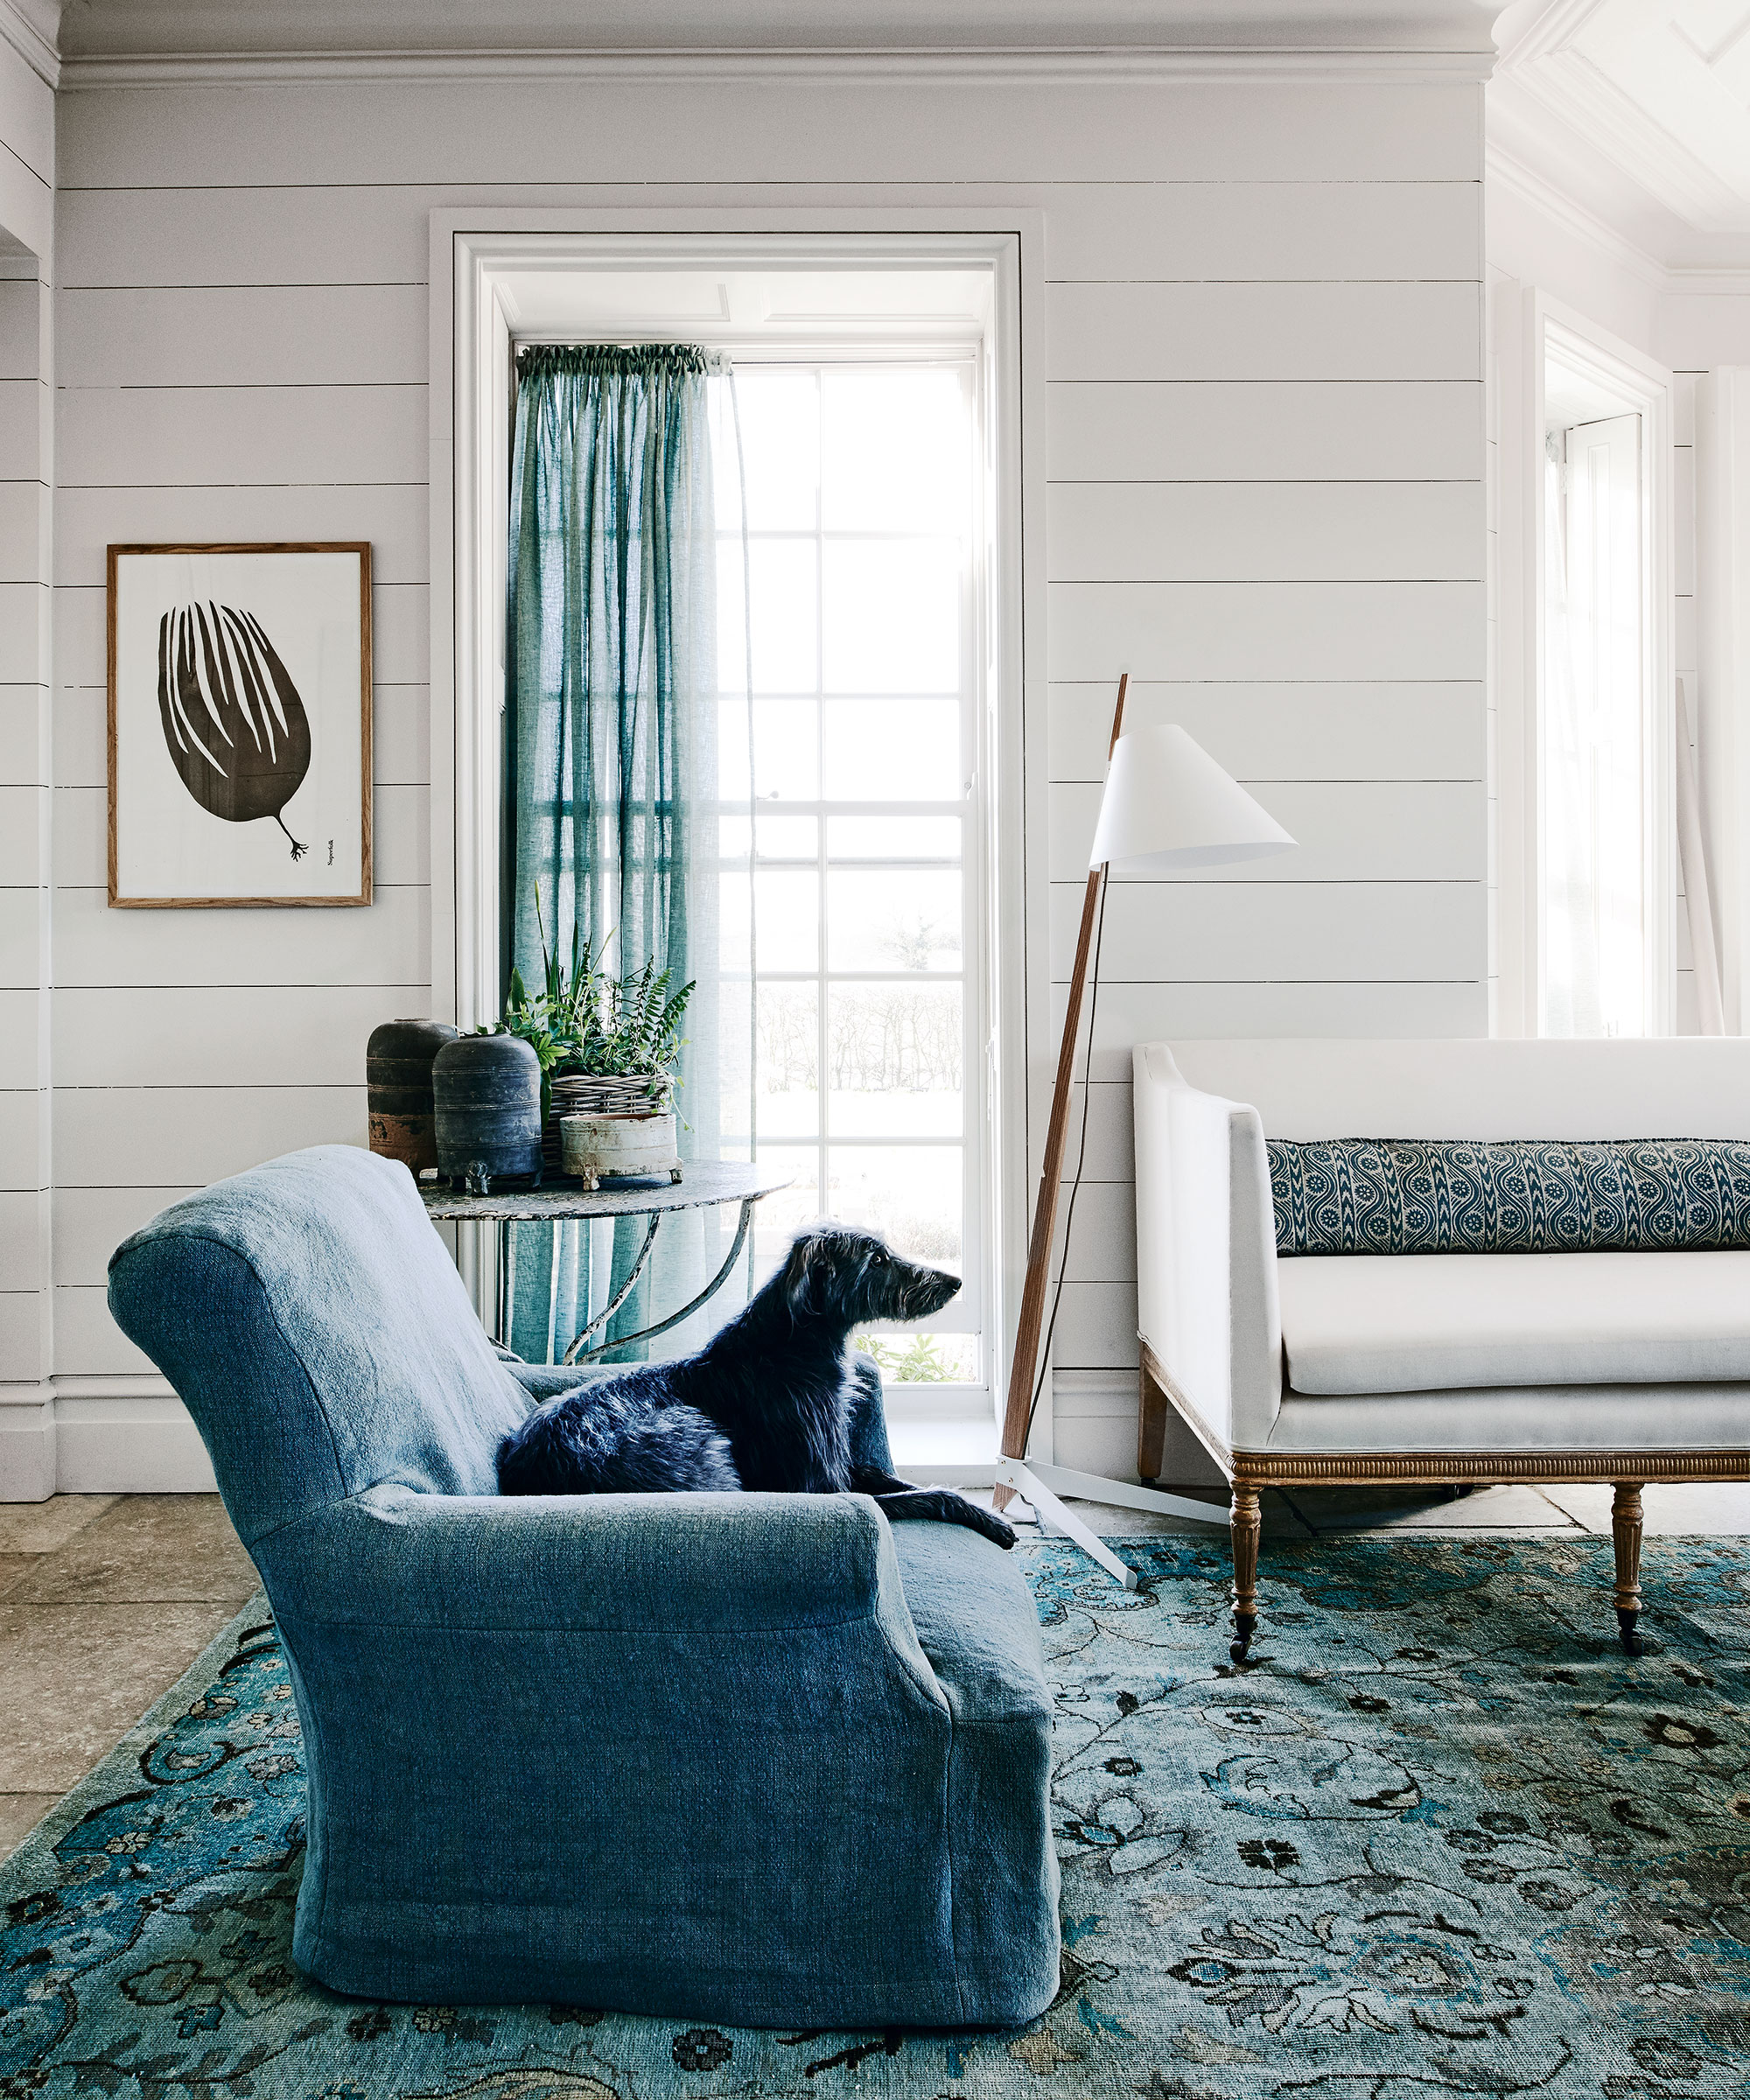 Living room with white walls and teal